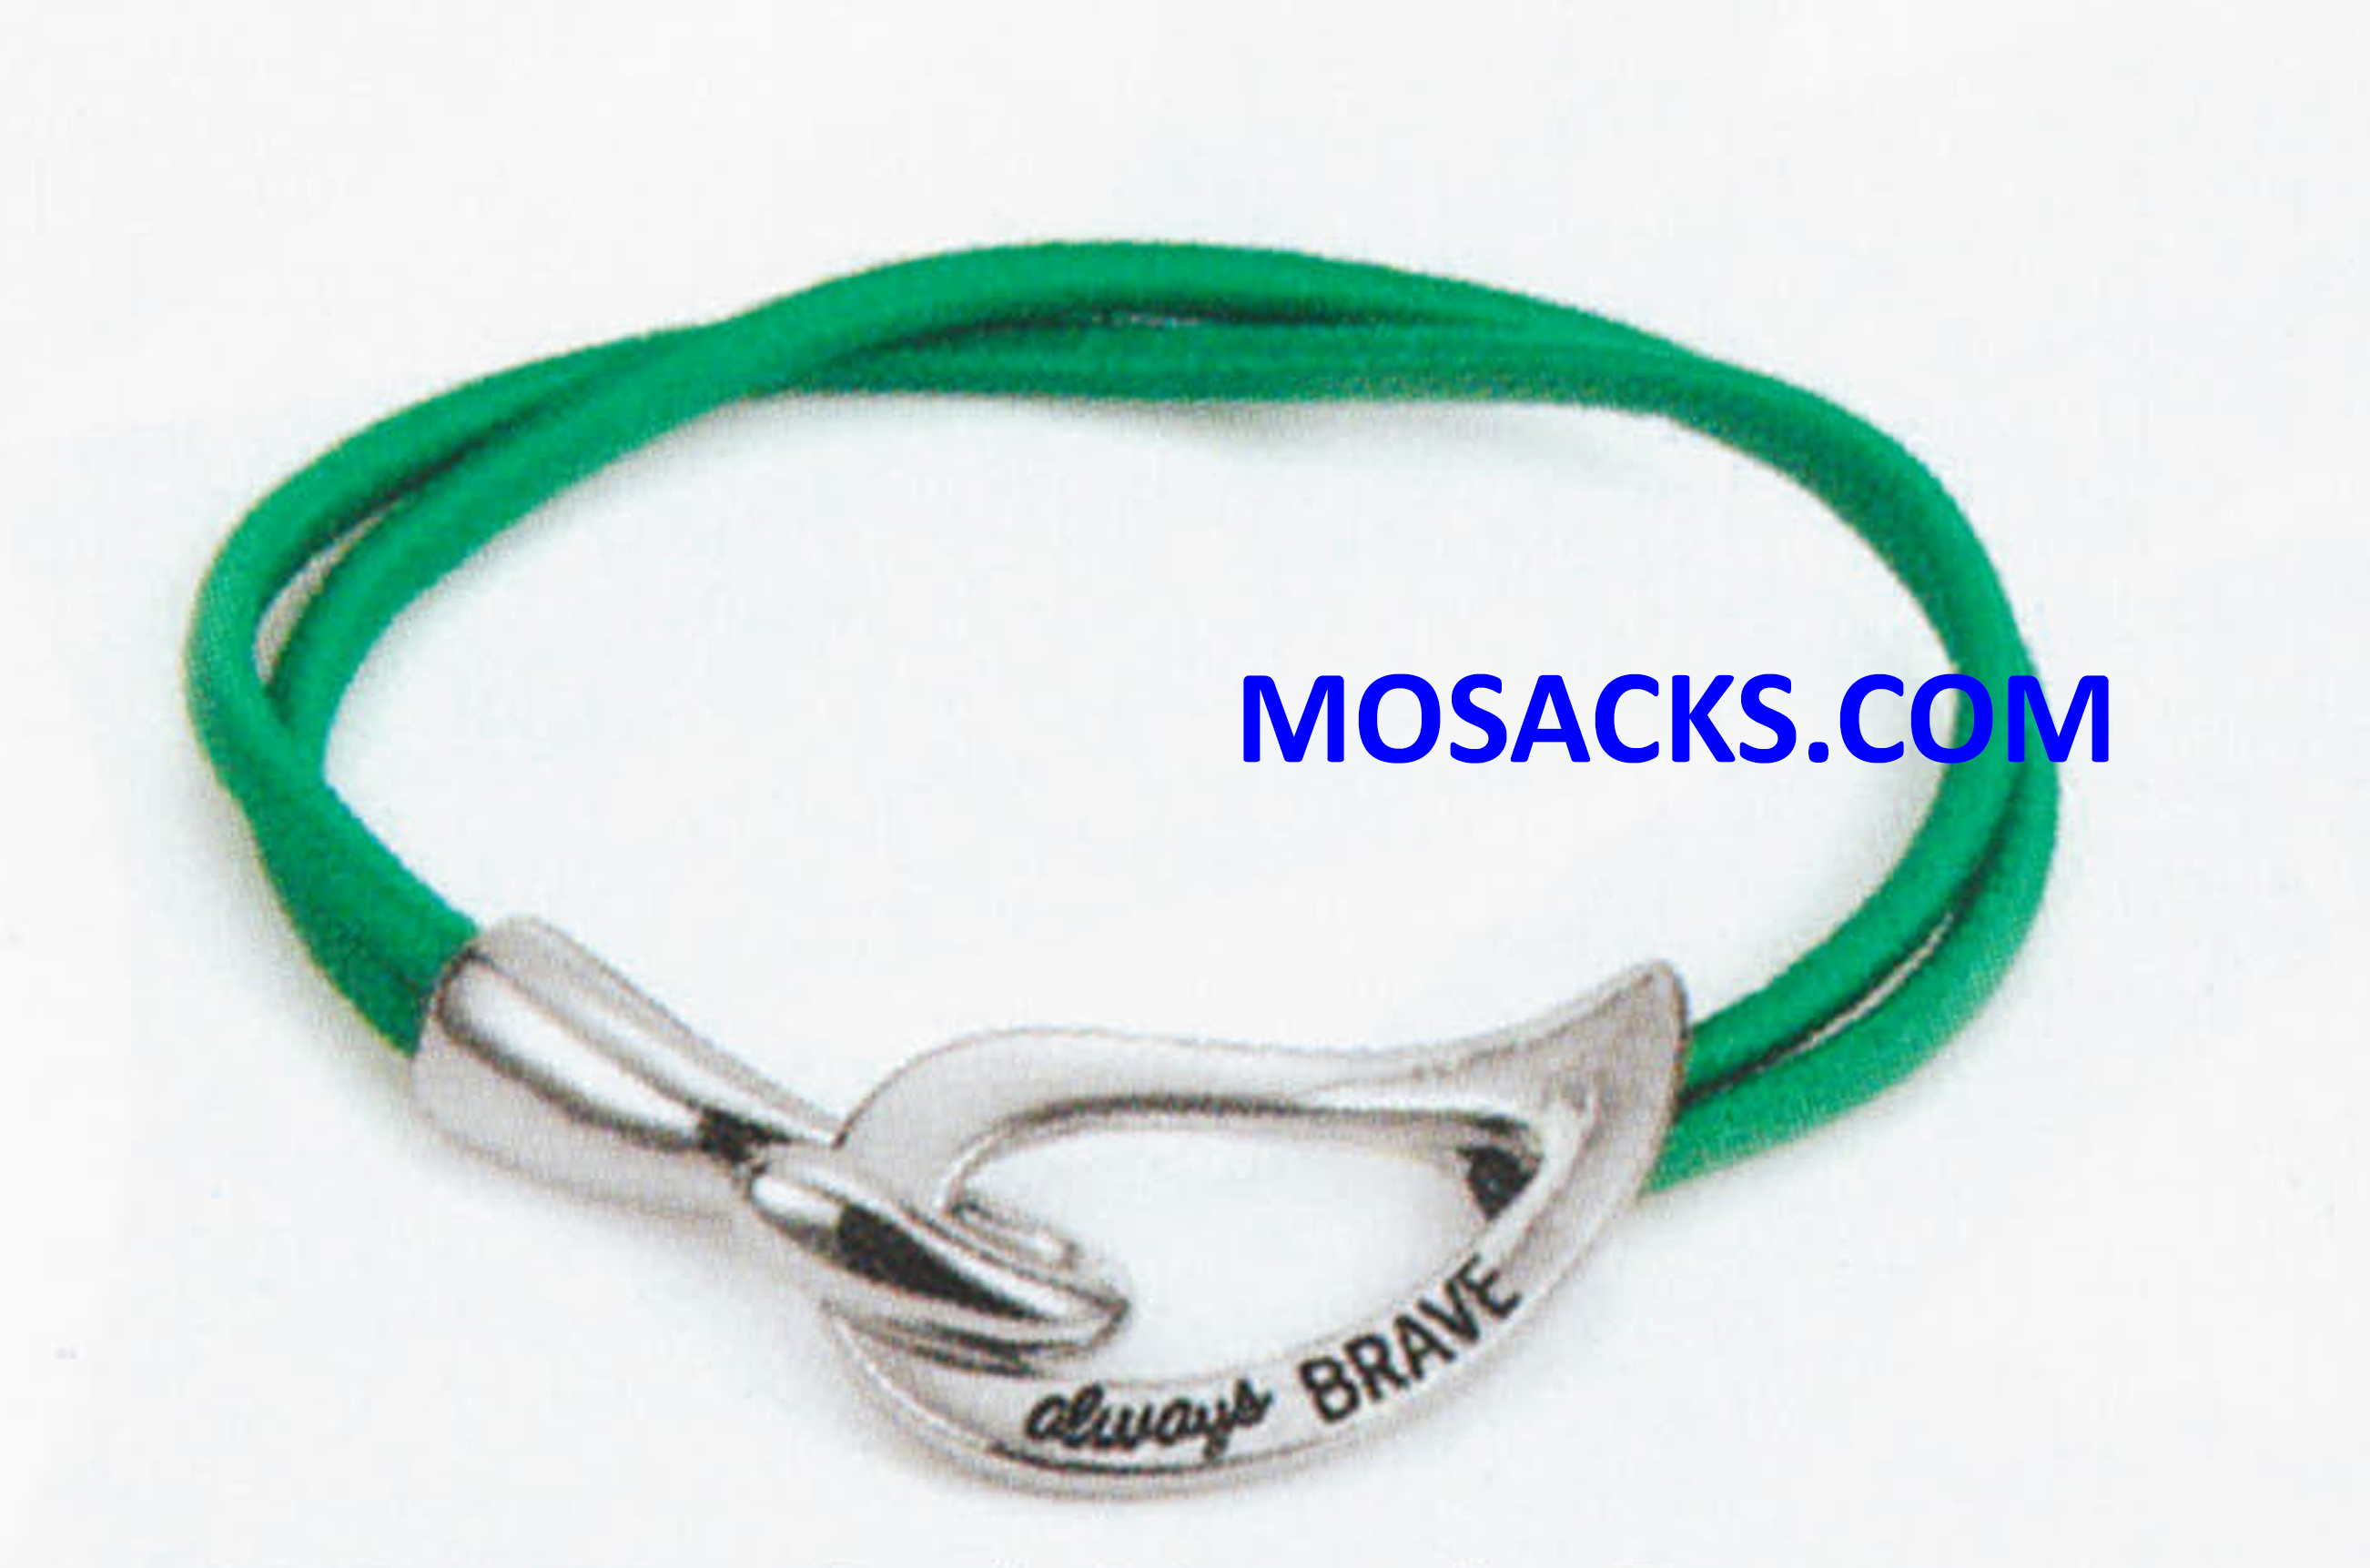 Alexa's Angels Always Brave Cancer Awareness Bracelet Rhodium Dark Green 220851for encouragement and to show support for Gallbladder, Bile Duct and Liver Cancer patients.